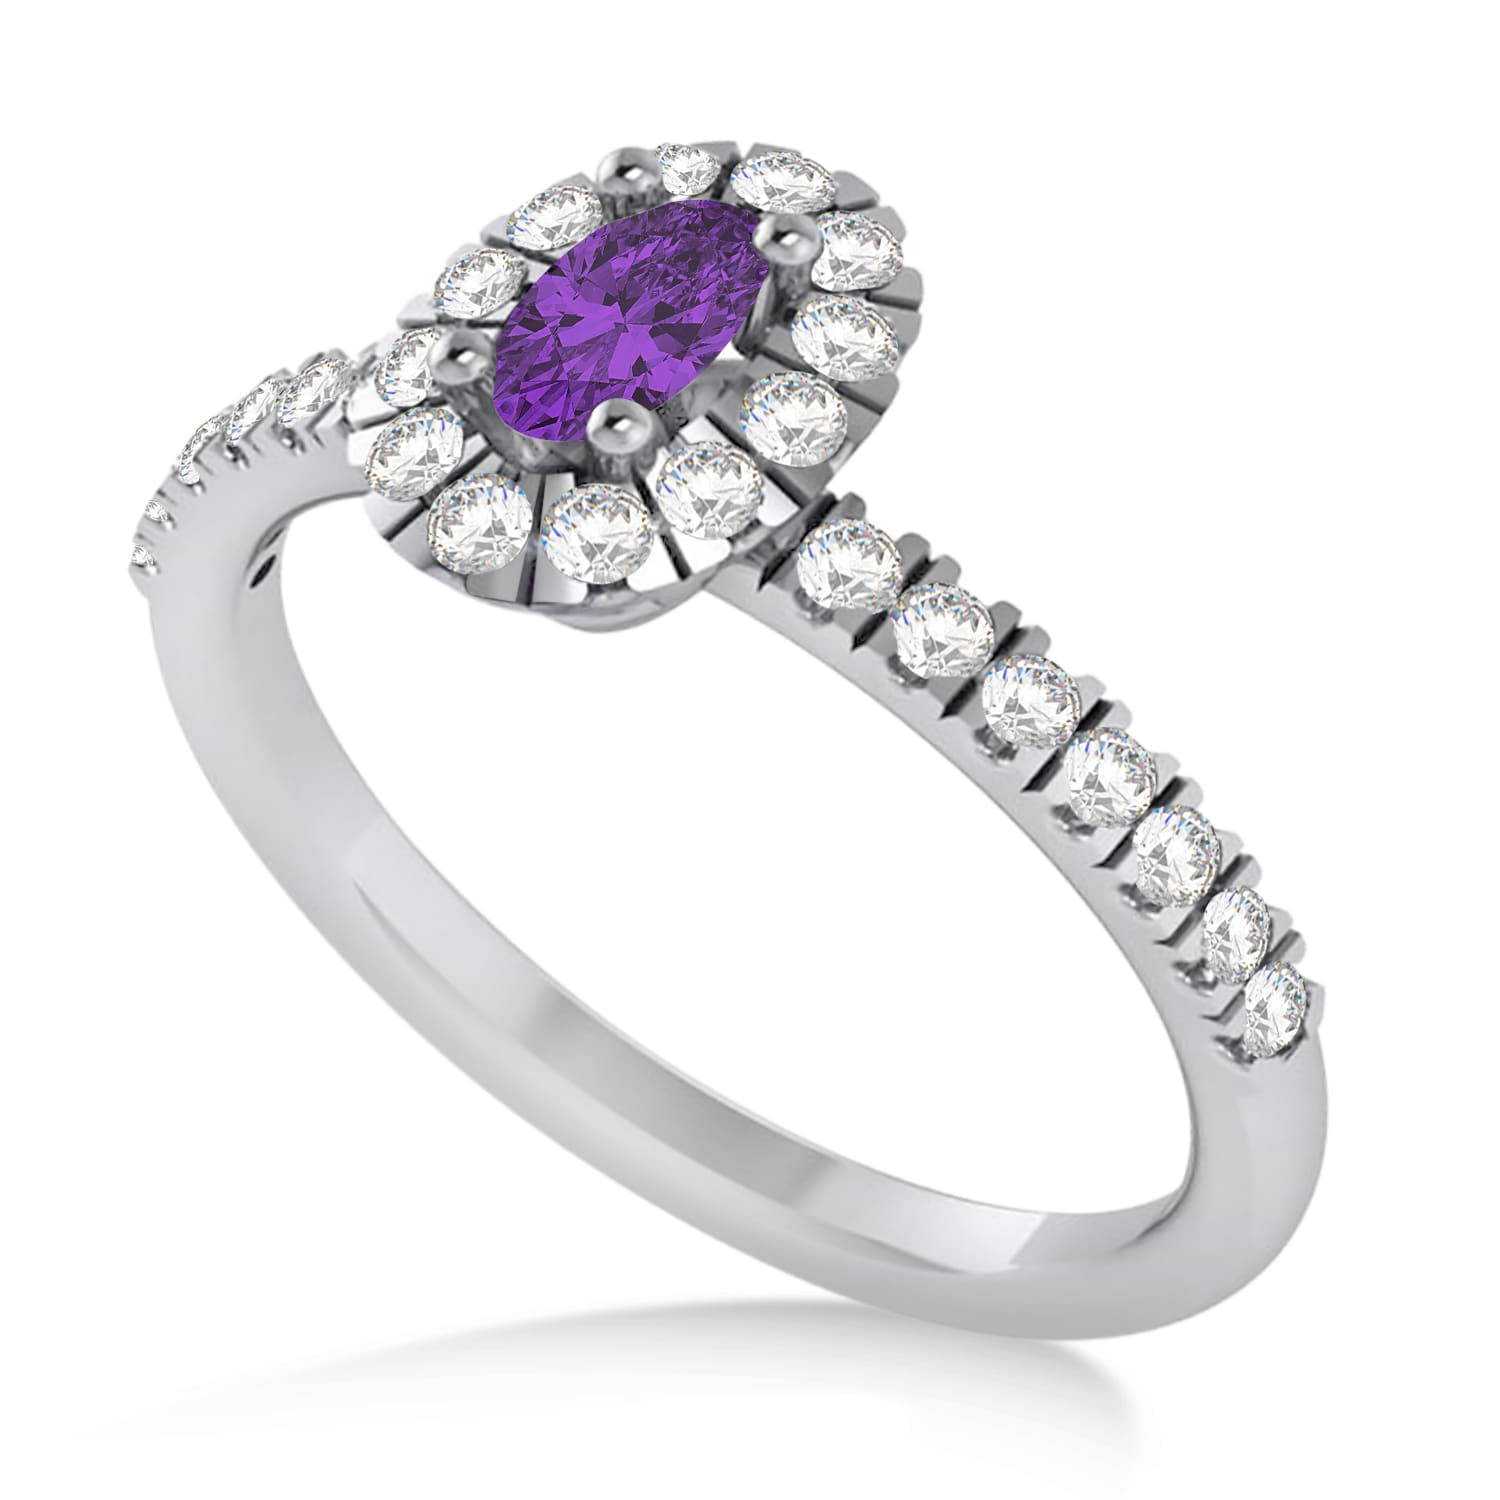 Oval Amethyst & Diamond Halo Engagement Ring 14k White Gold (0.60ct)